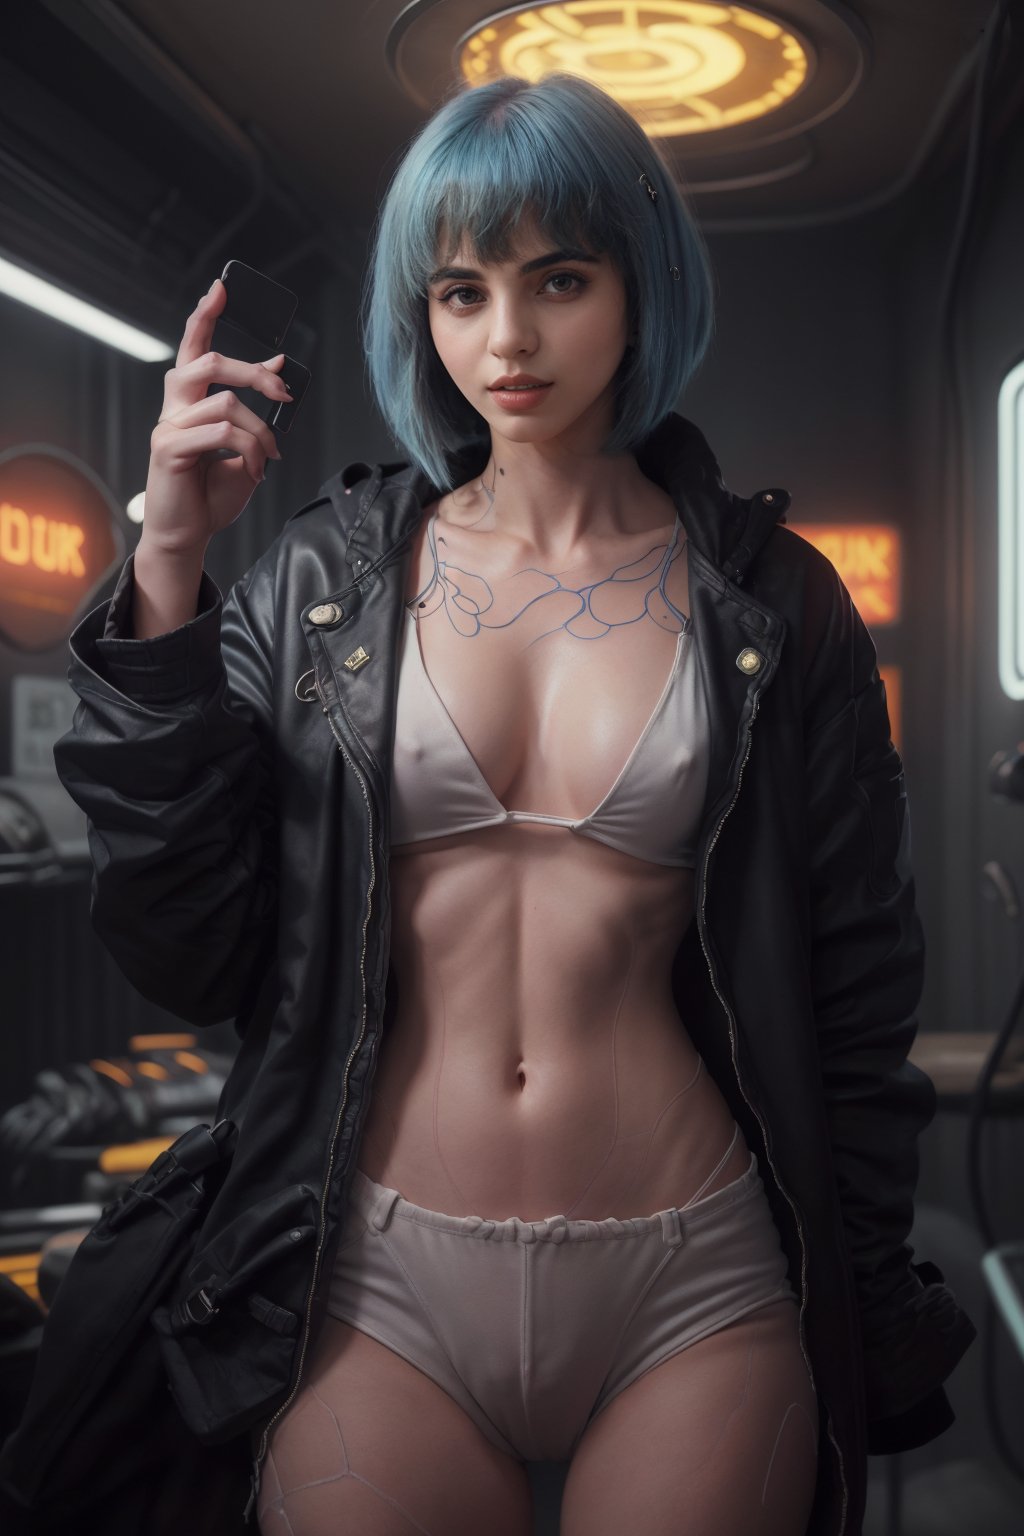 Here's a high-quality, coherent, and photorealistic , A 25-year-old woman with long, blue hair adorned with a hair ornament, stands solo in a futuristic room bathed in neon lights. She wears a designer blouse and jacket combo, paired with a turtle-neck sweater underneath. ,CyberpunkWorld,Fit body